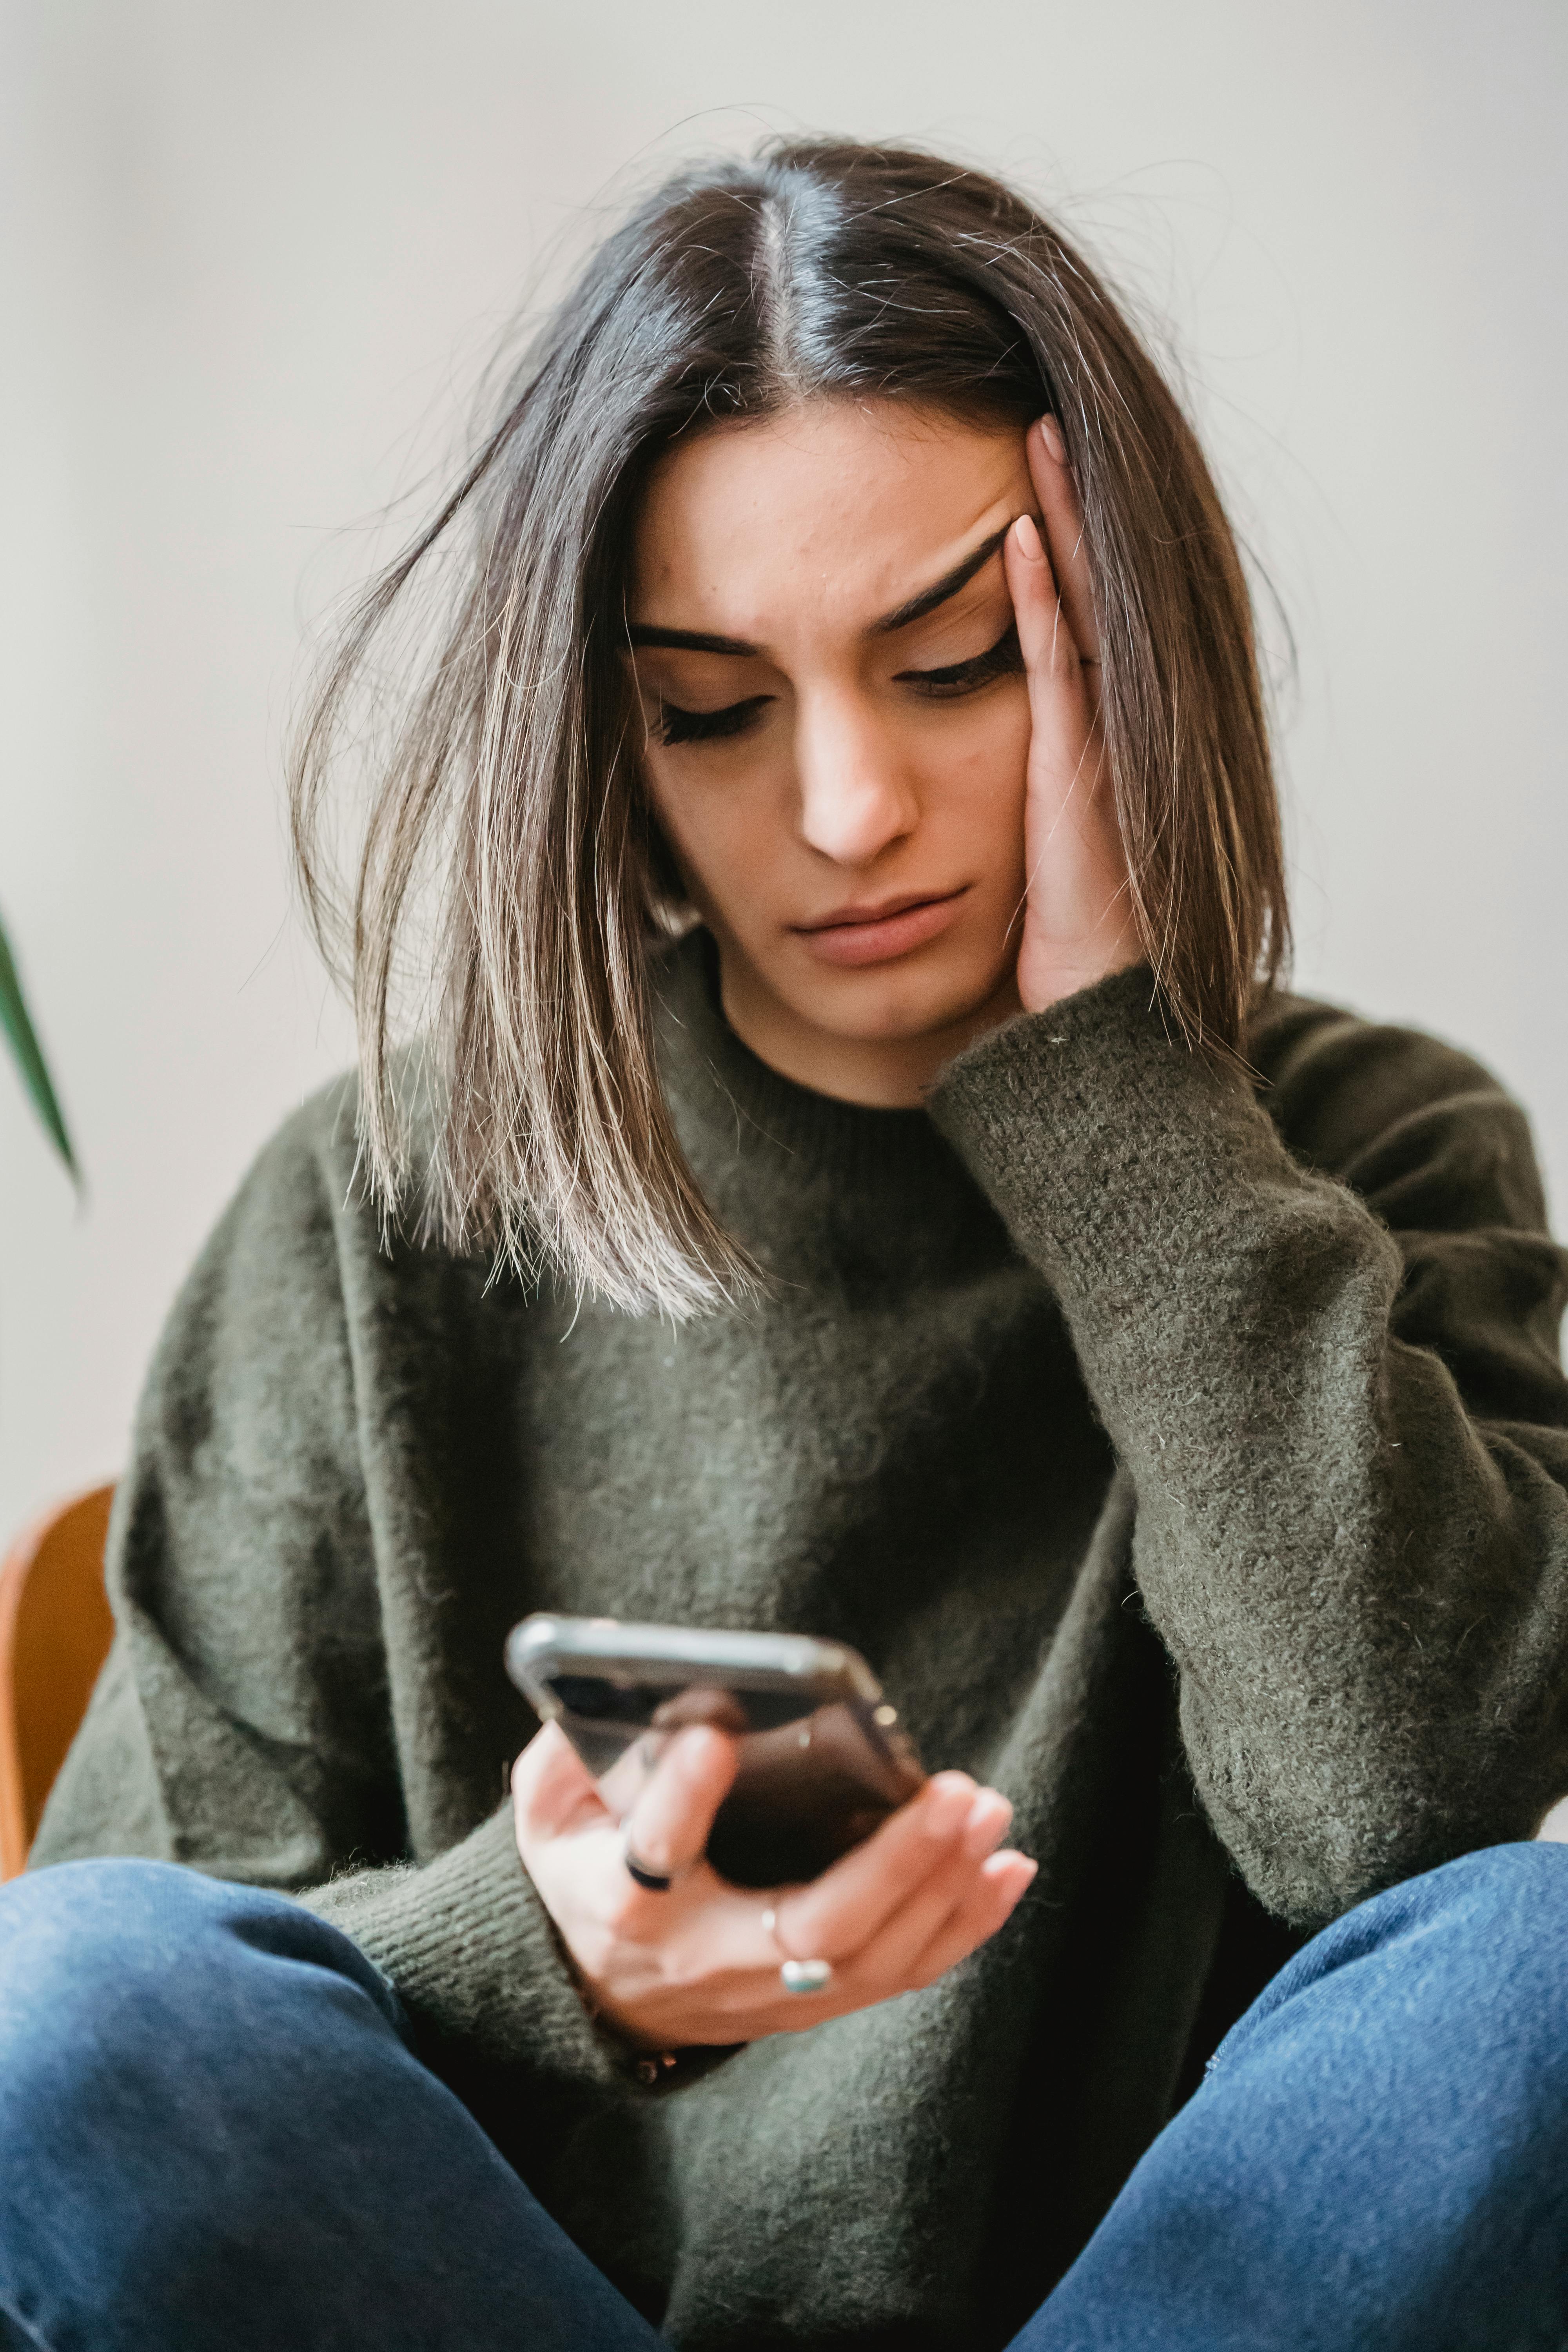 A woman thinking while on her phone | Source: Pexels